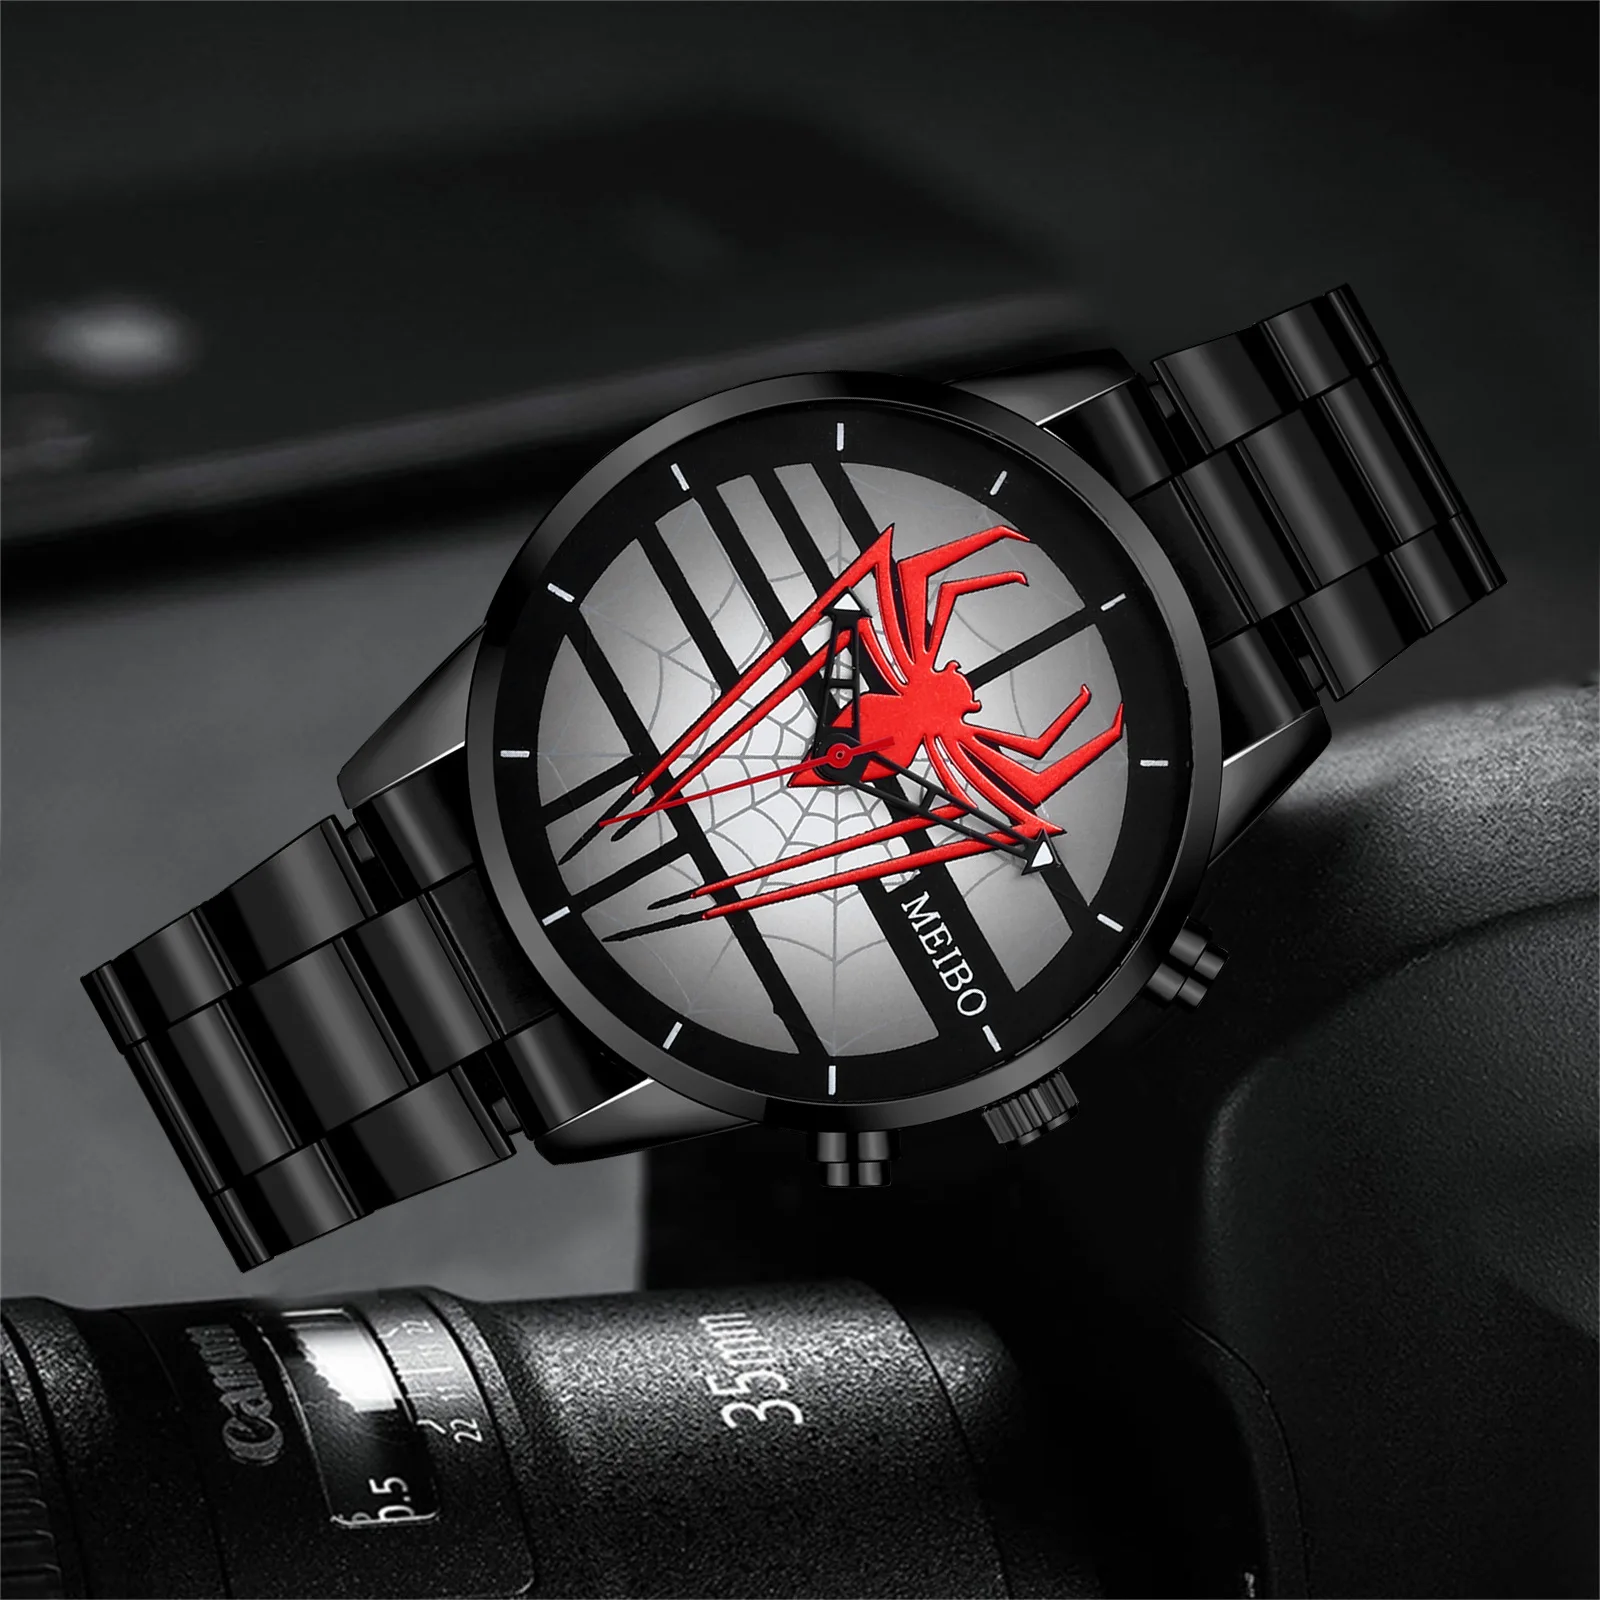 

SMVP2021 Luxury Brand Spider Watches For Men Casual Military Sports Quartz Clock Male Fashion Business Wristwatch Relogio Mascul